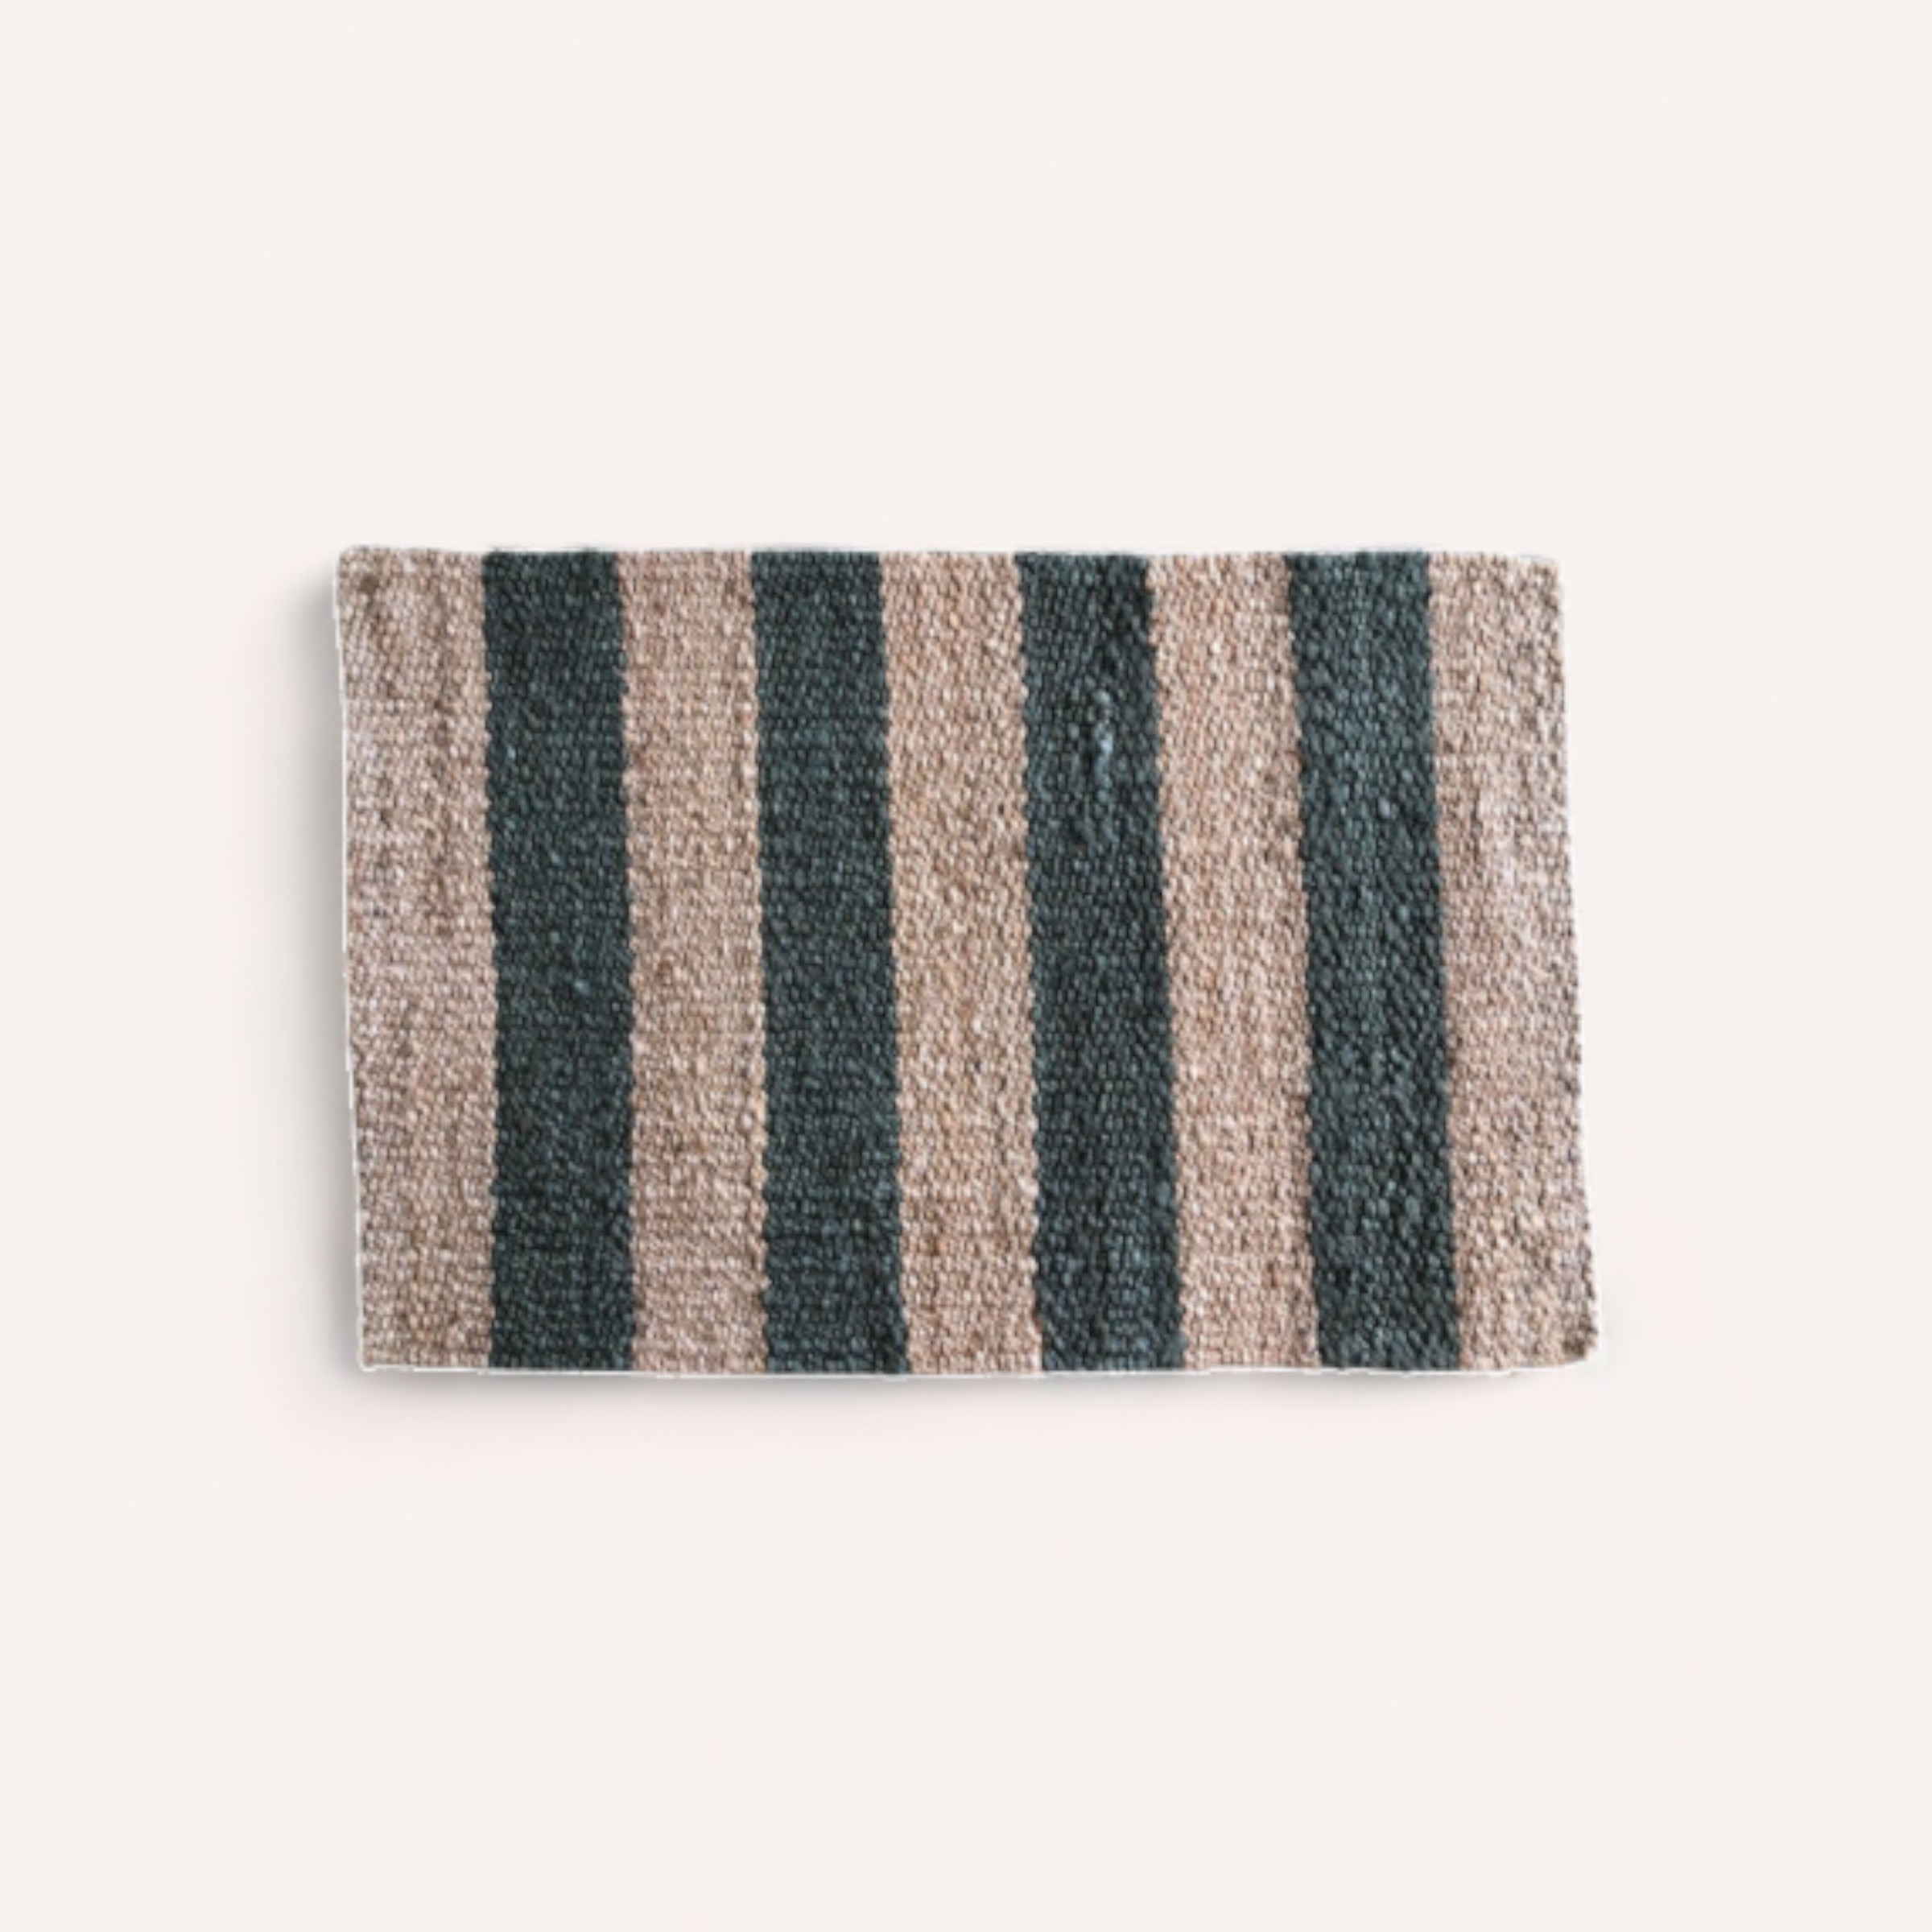 A Jute Mat Green Stripe by PottedNZ, featuring green stripes, laid flat on a white background.